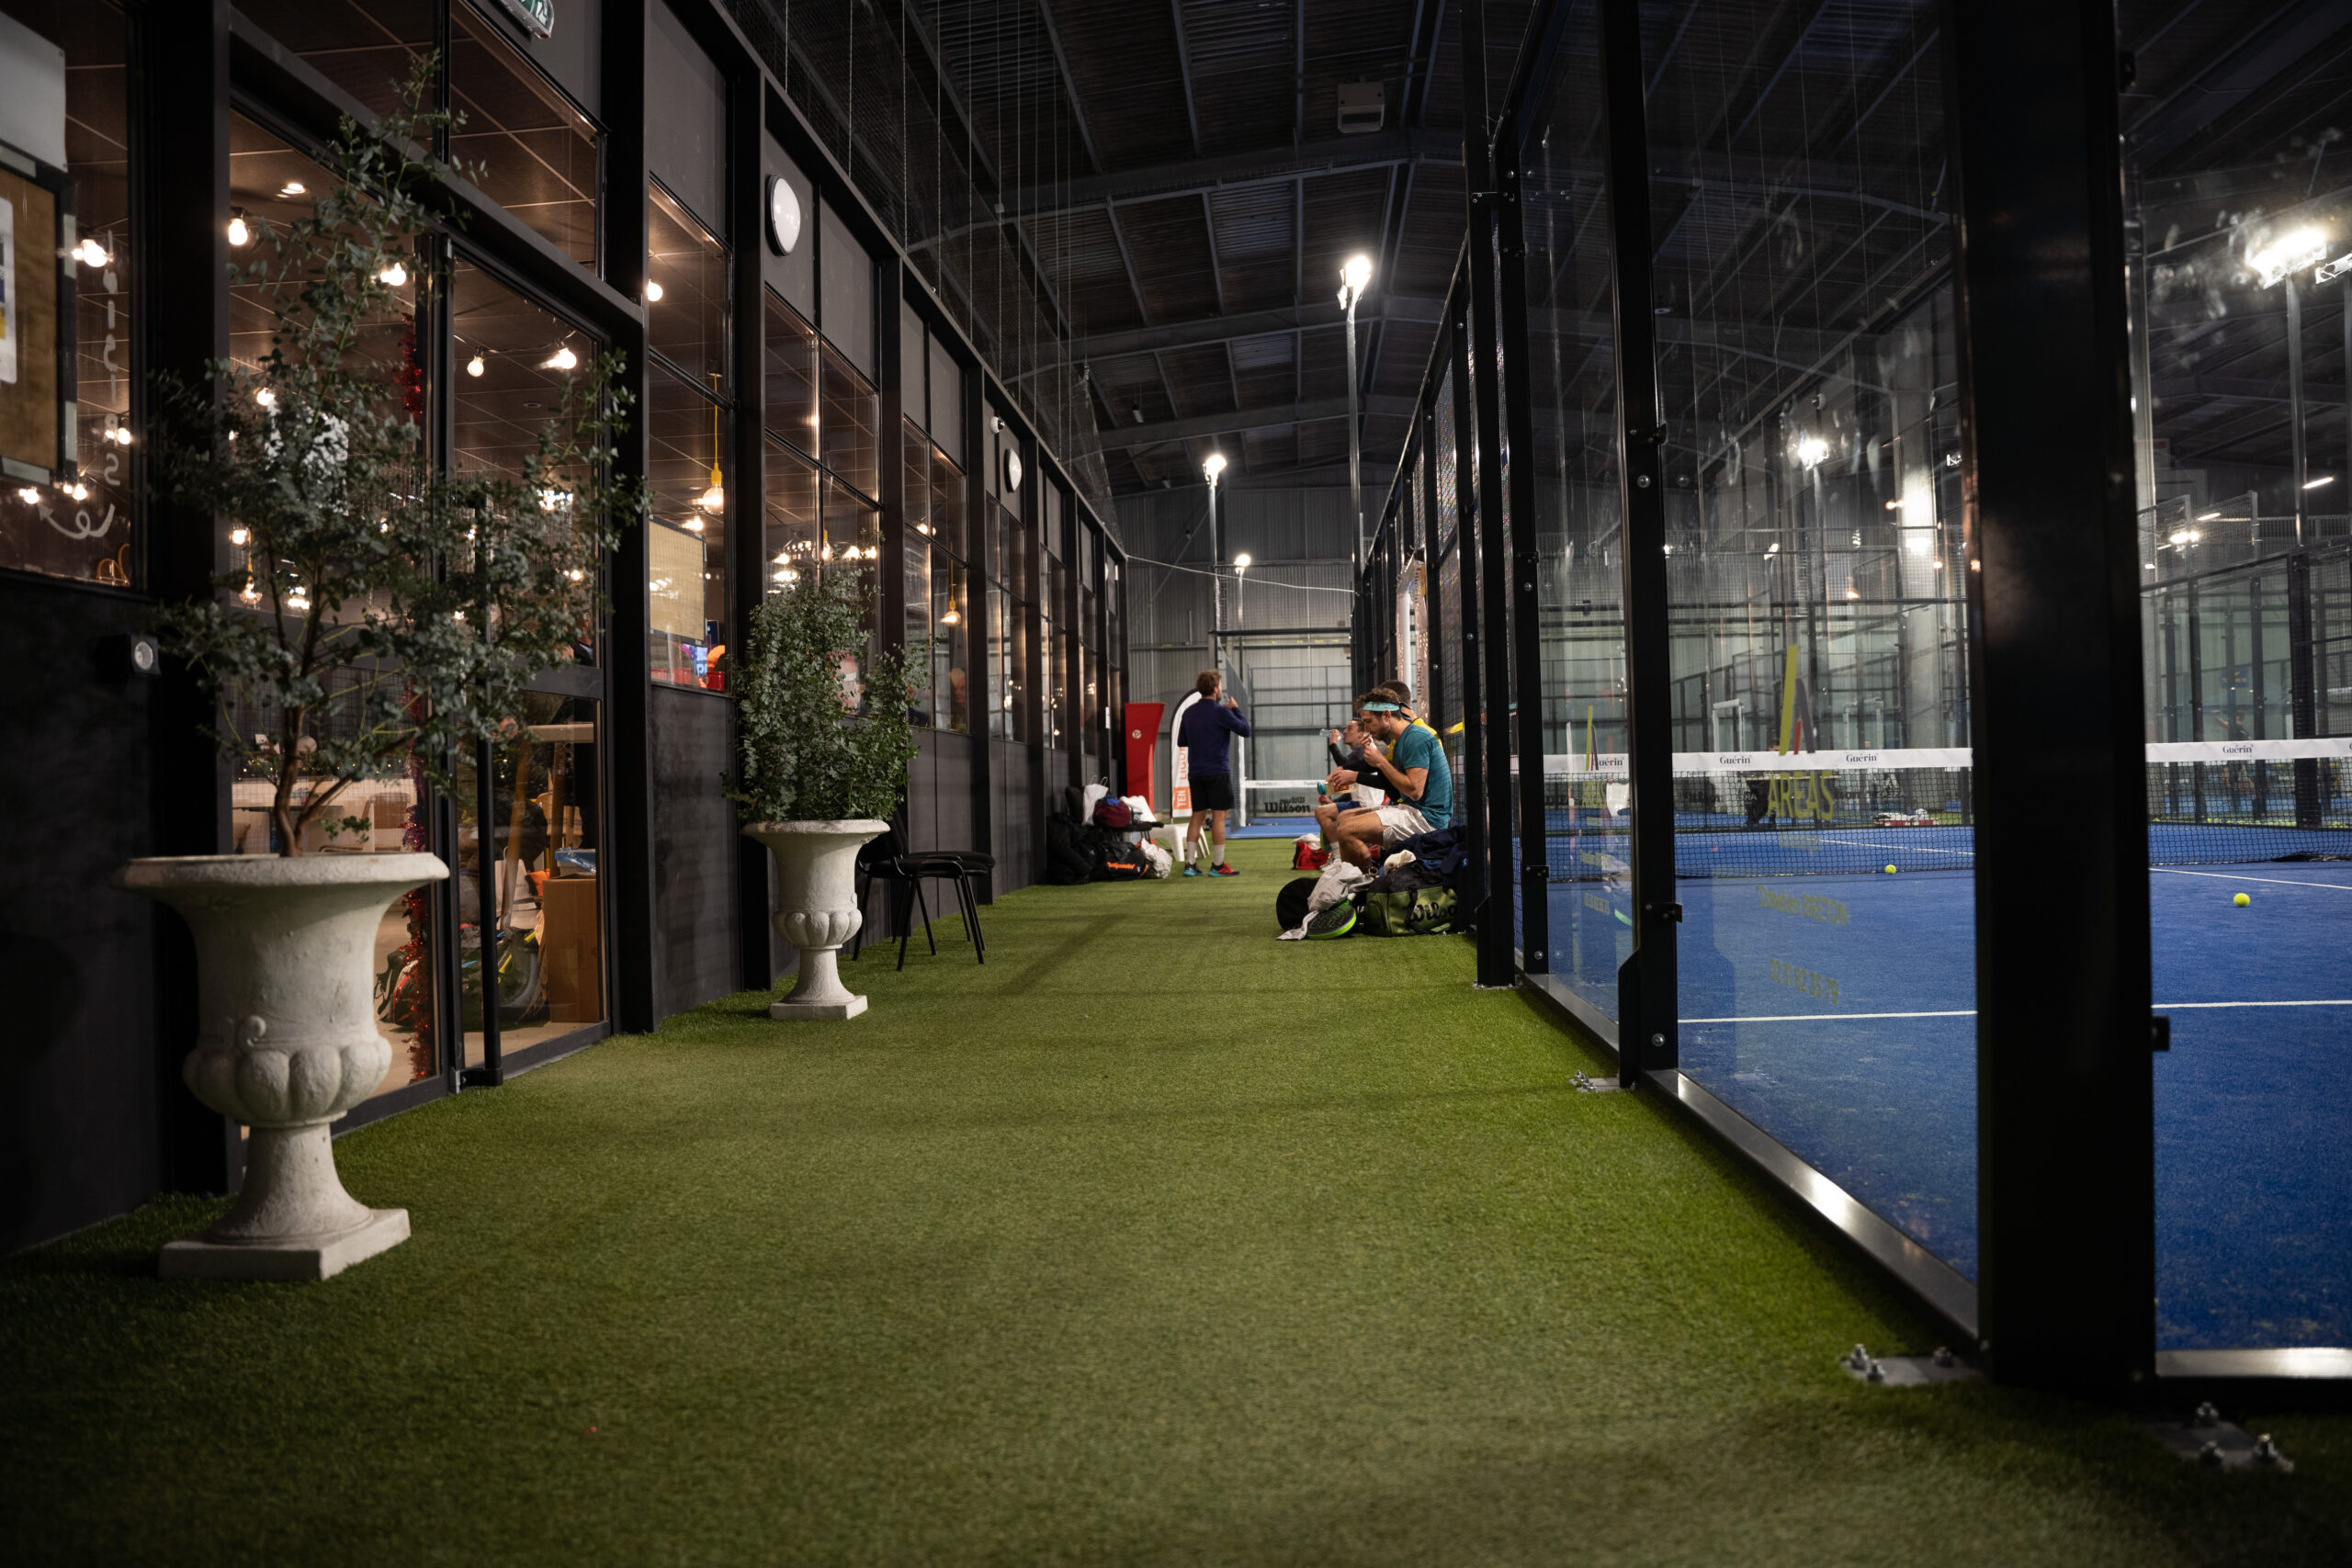 PadelShot is accelerating its development in the 4 corners of France!